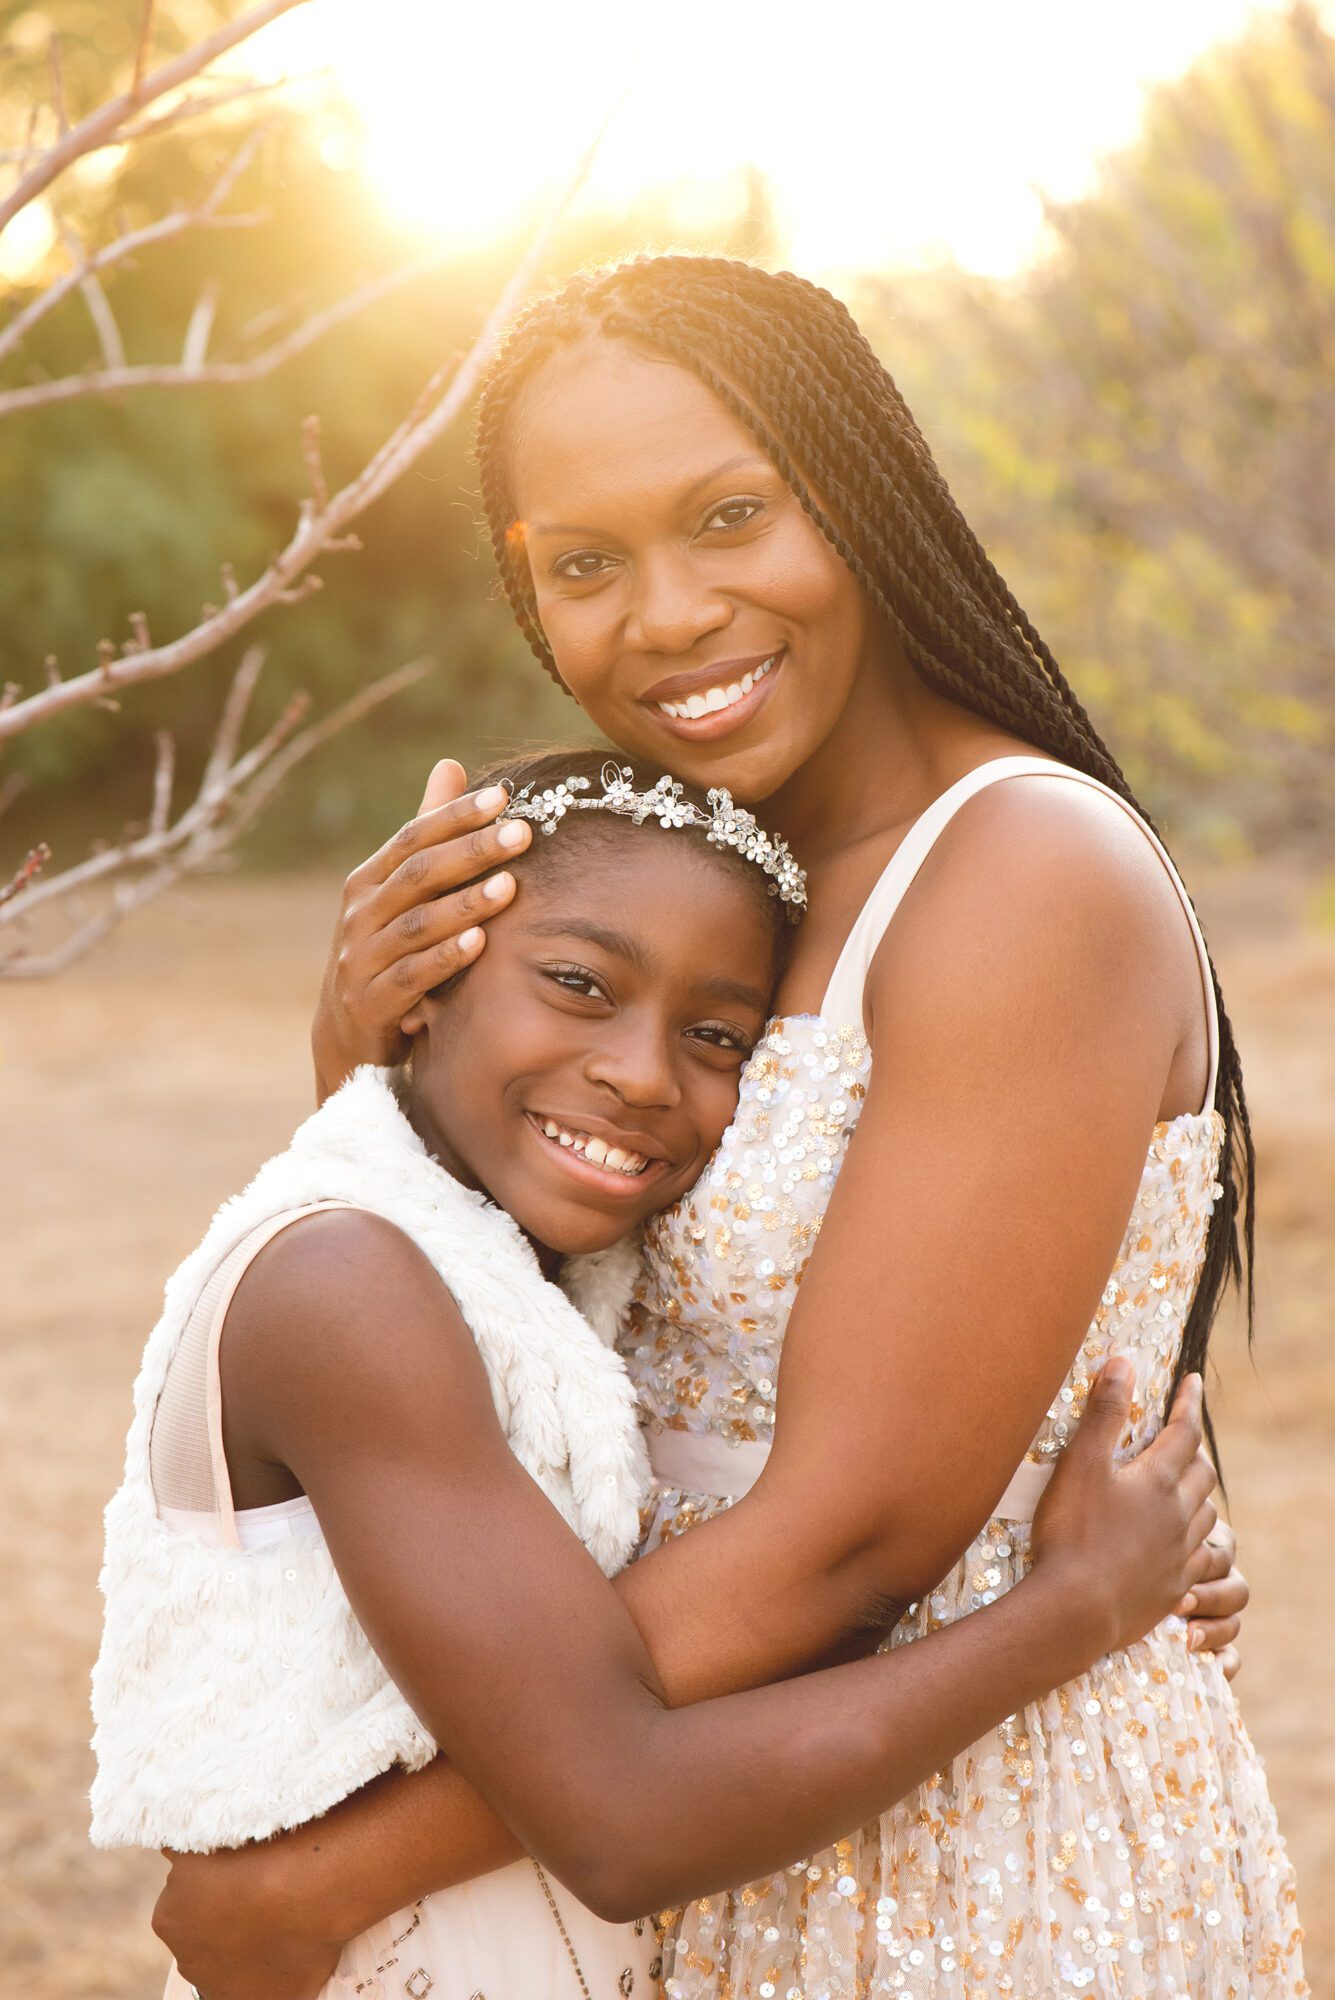 Young girl with mother embracing in golden sunlight Chandler Luxury Photography Studio Family Portraits | Reaj Roberts Photography